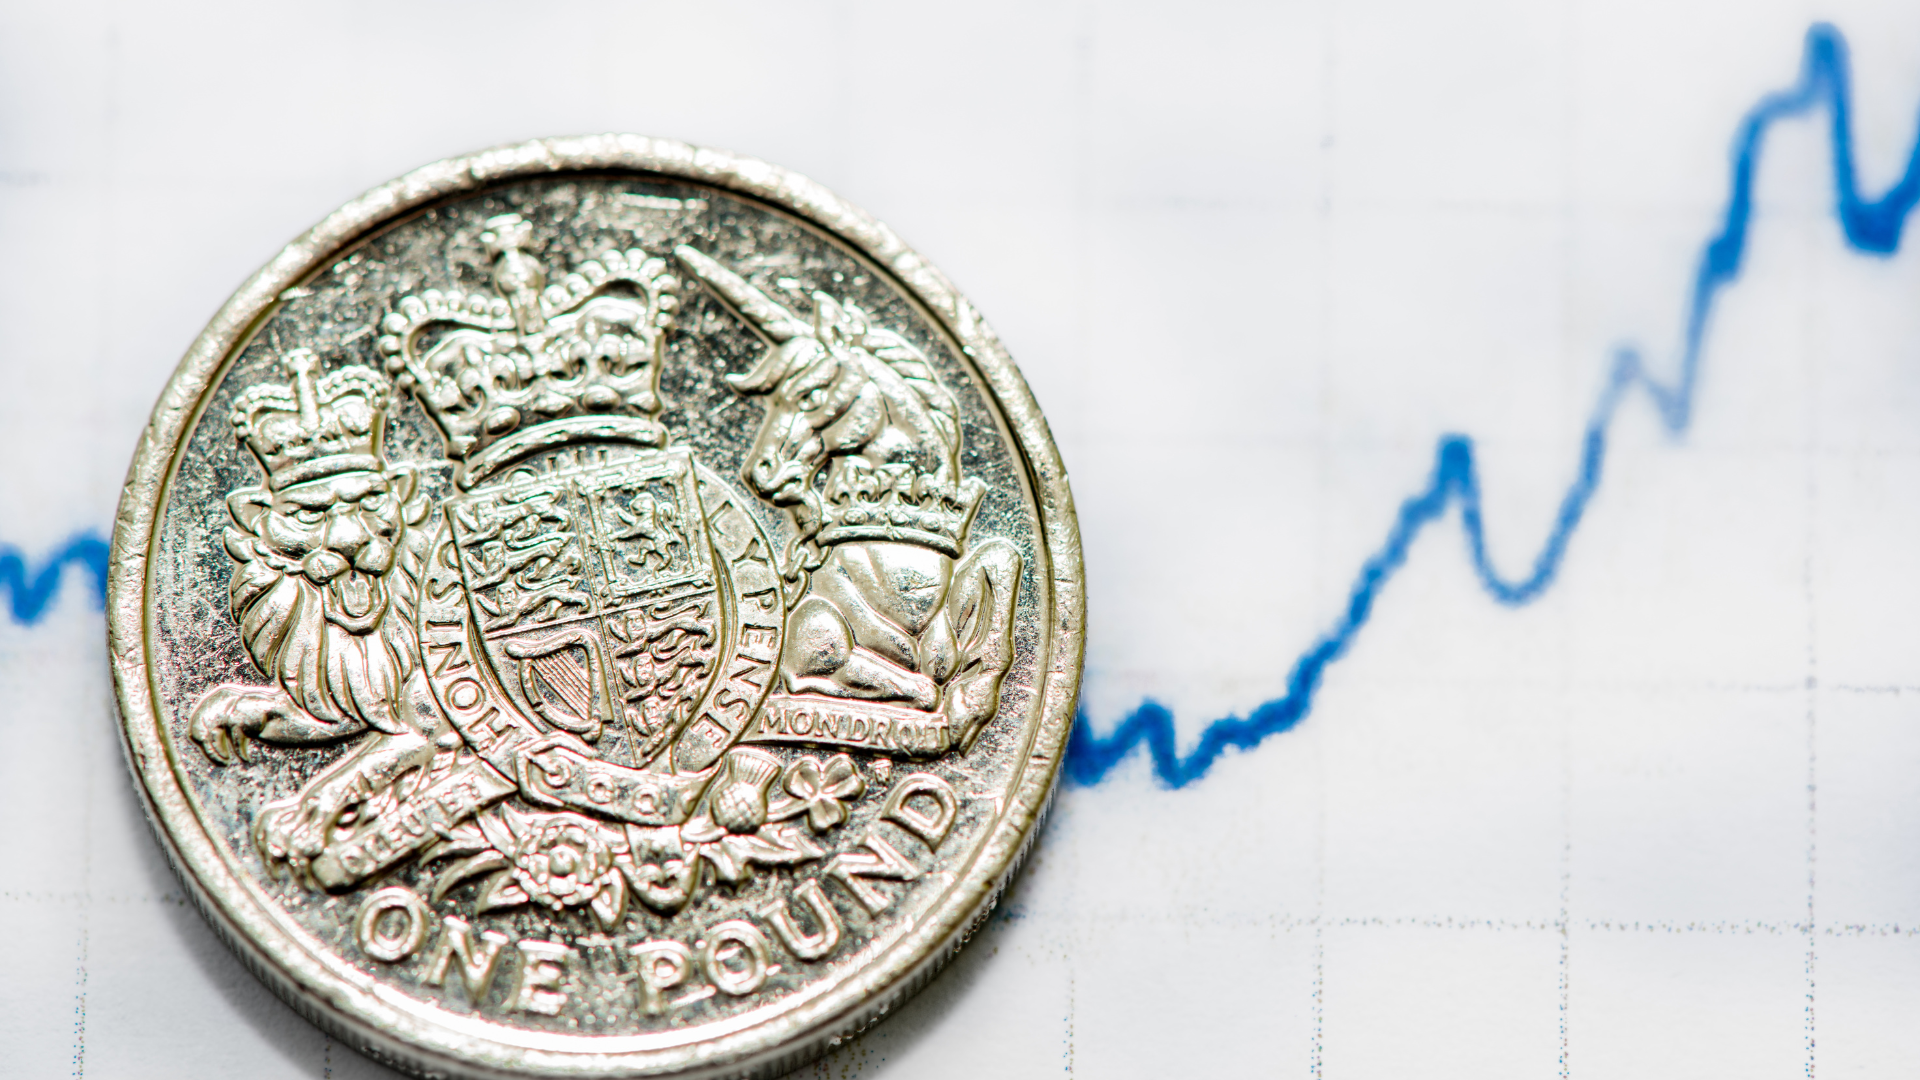 A UK pound coin on a line-graph